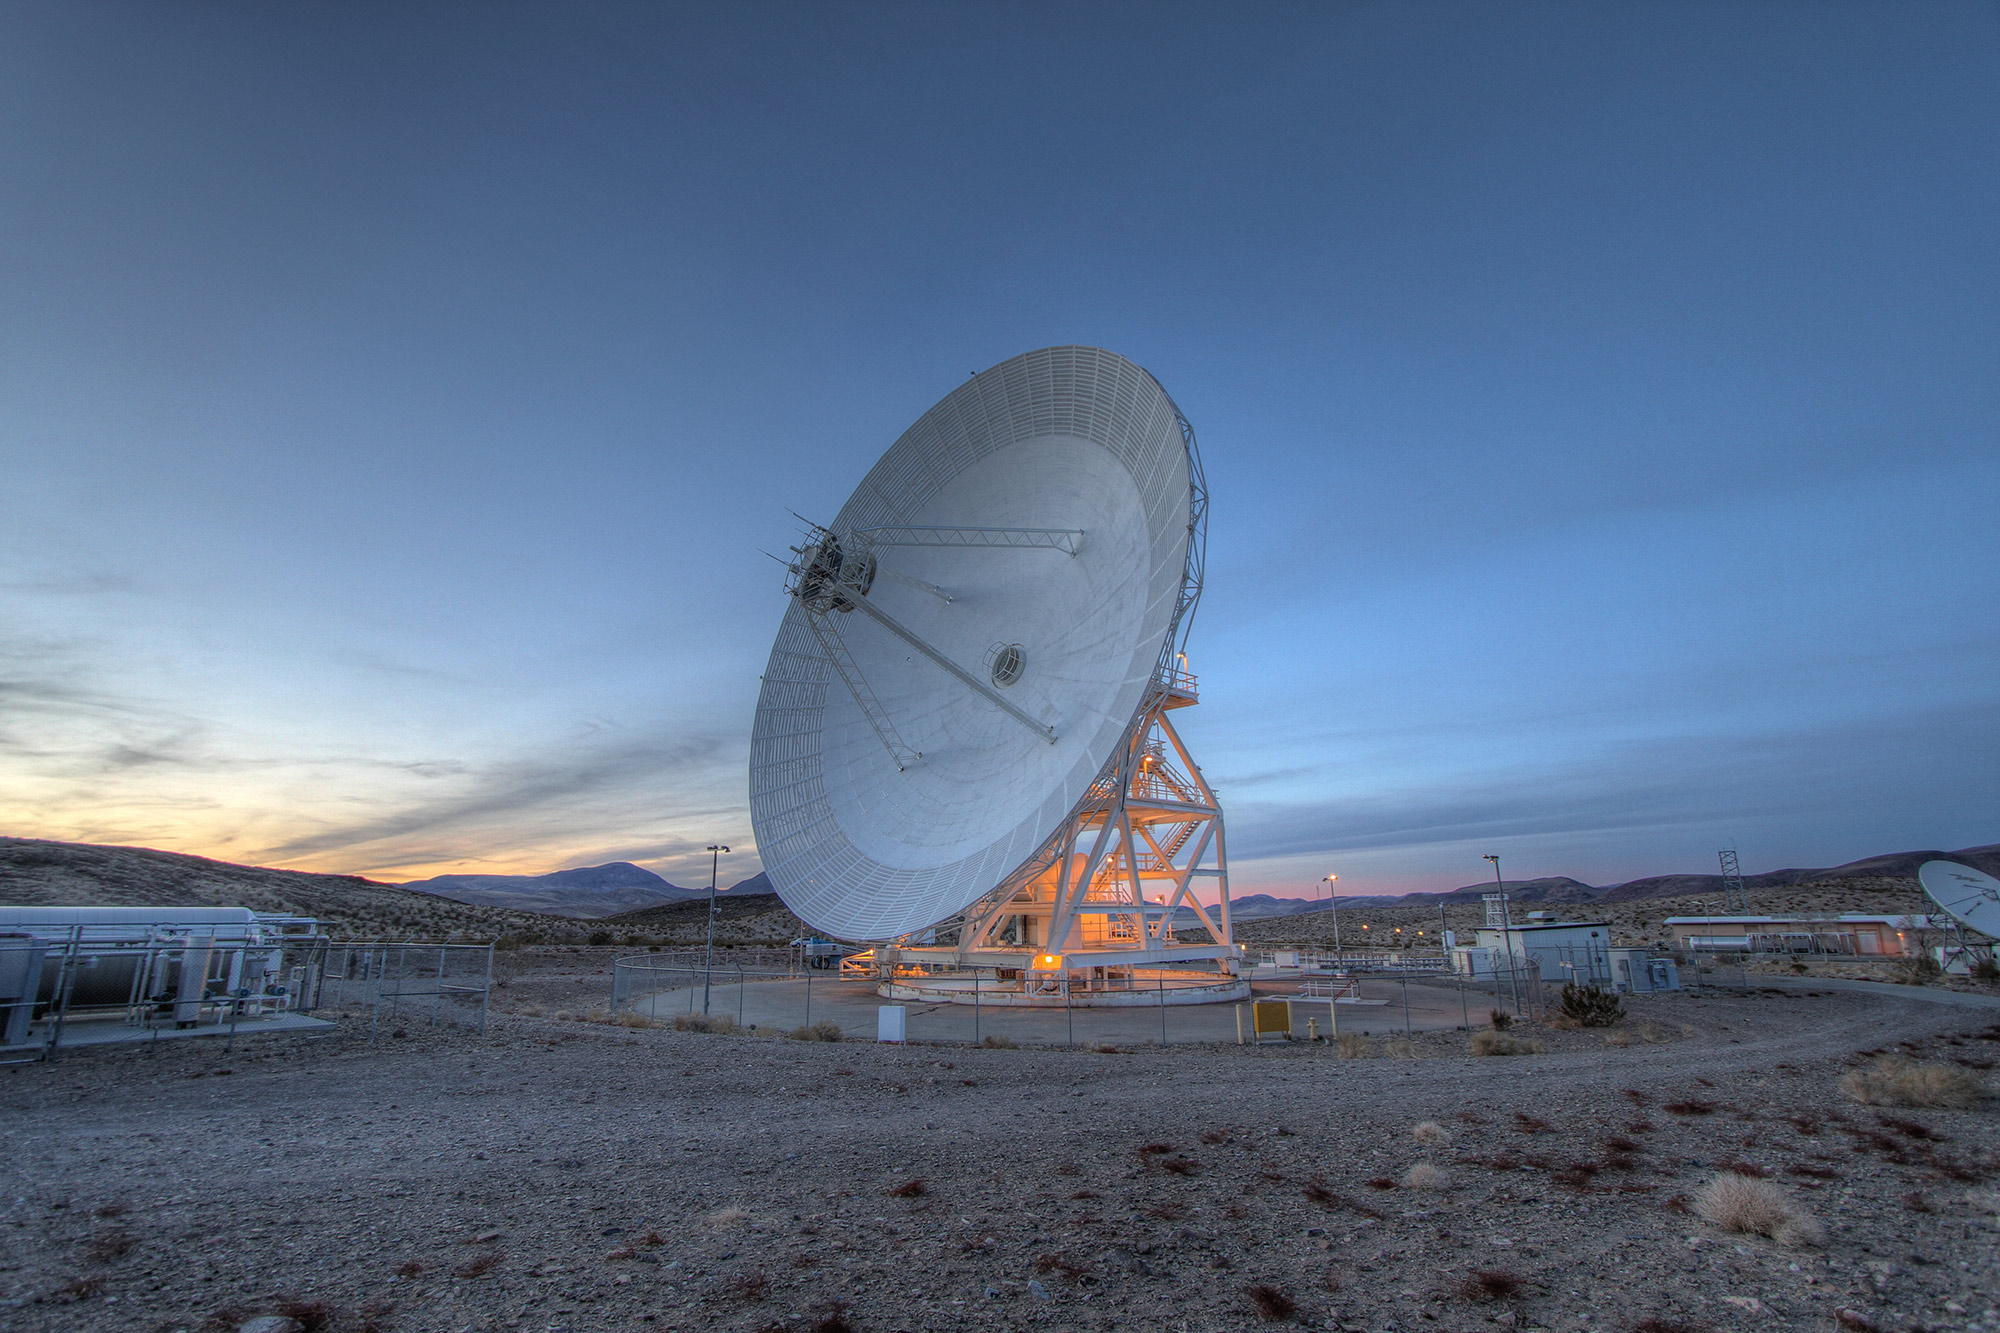 A 34-meter antenna at the Goldstone Deep Space Communications Complex in Goldstone, California. Credit: NASA/JPL-Caltech